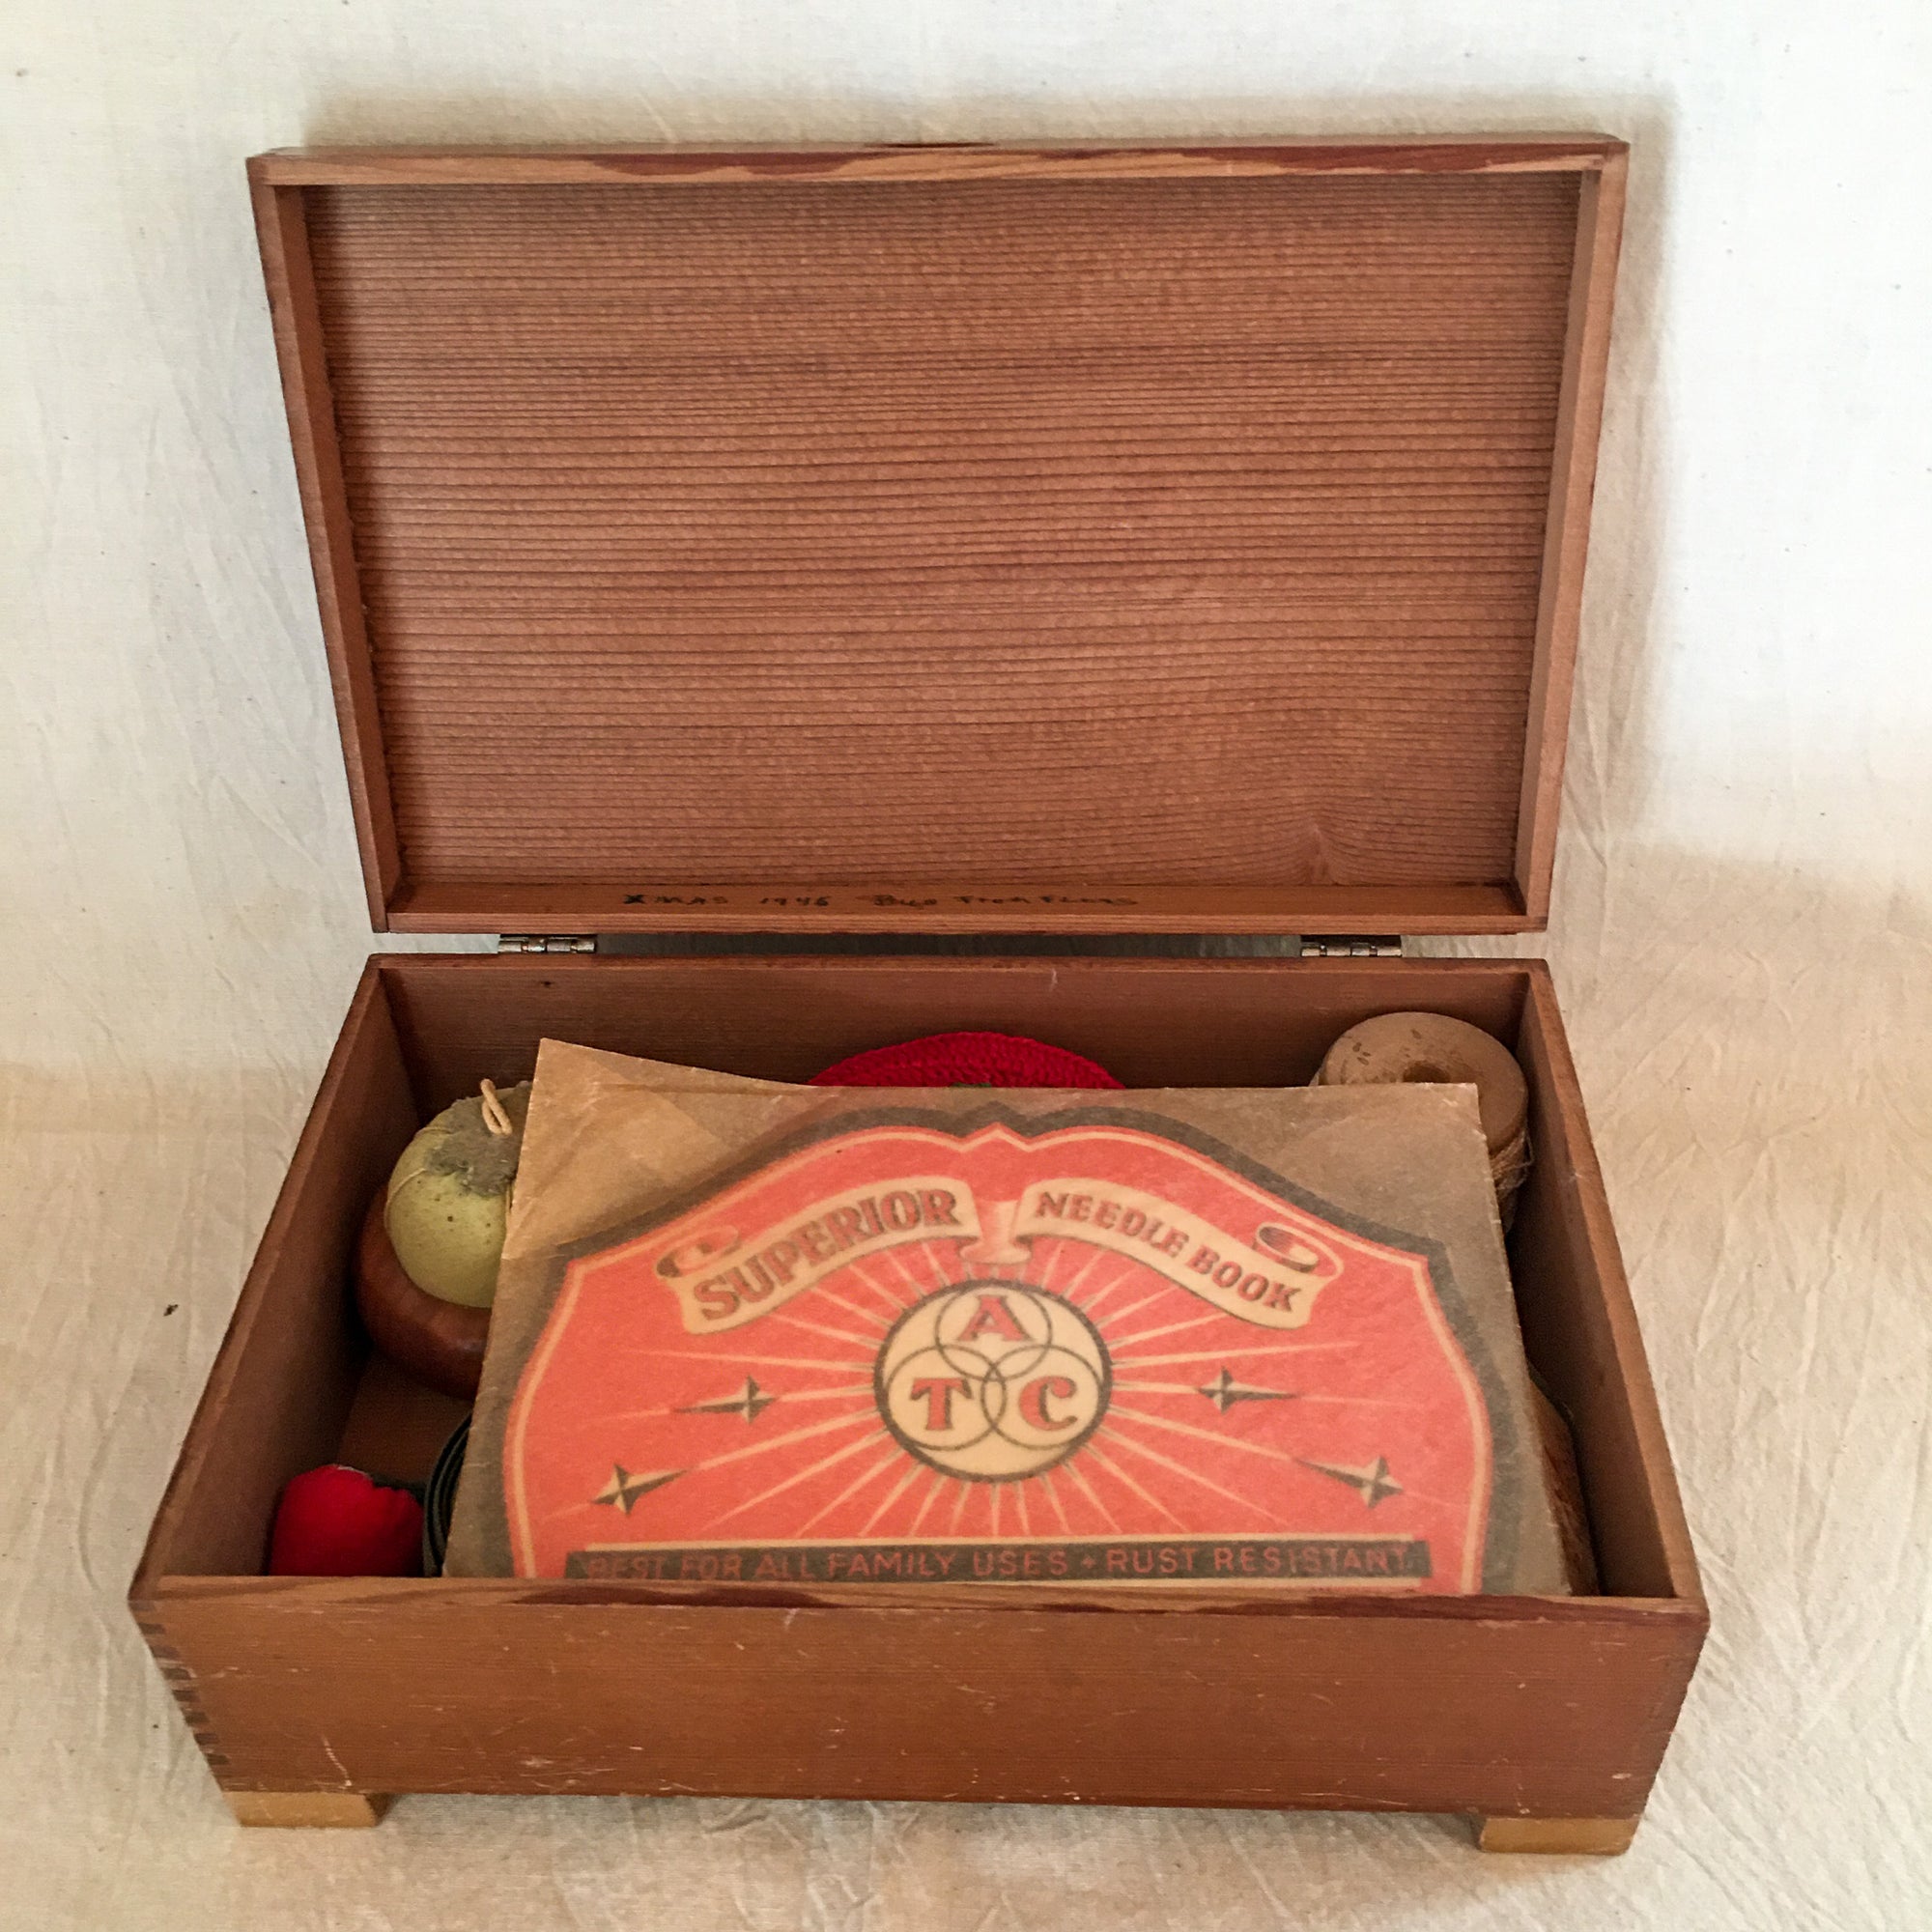 1946 Wooden Jewel/Sewing Box with Contents